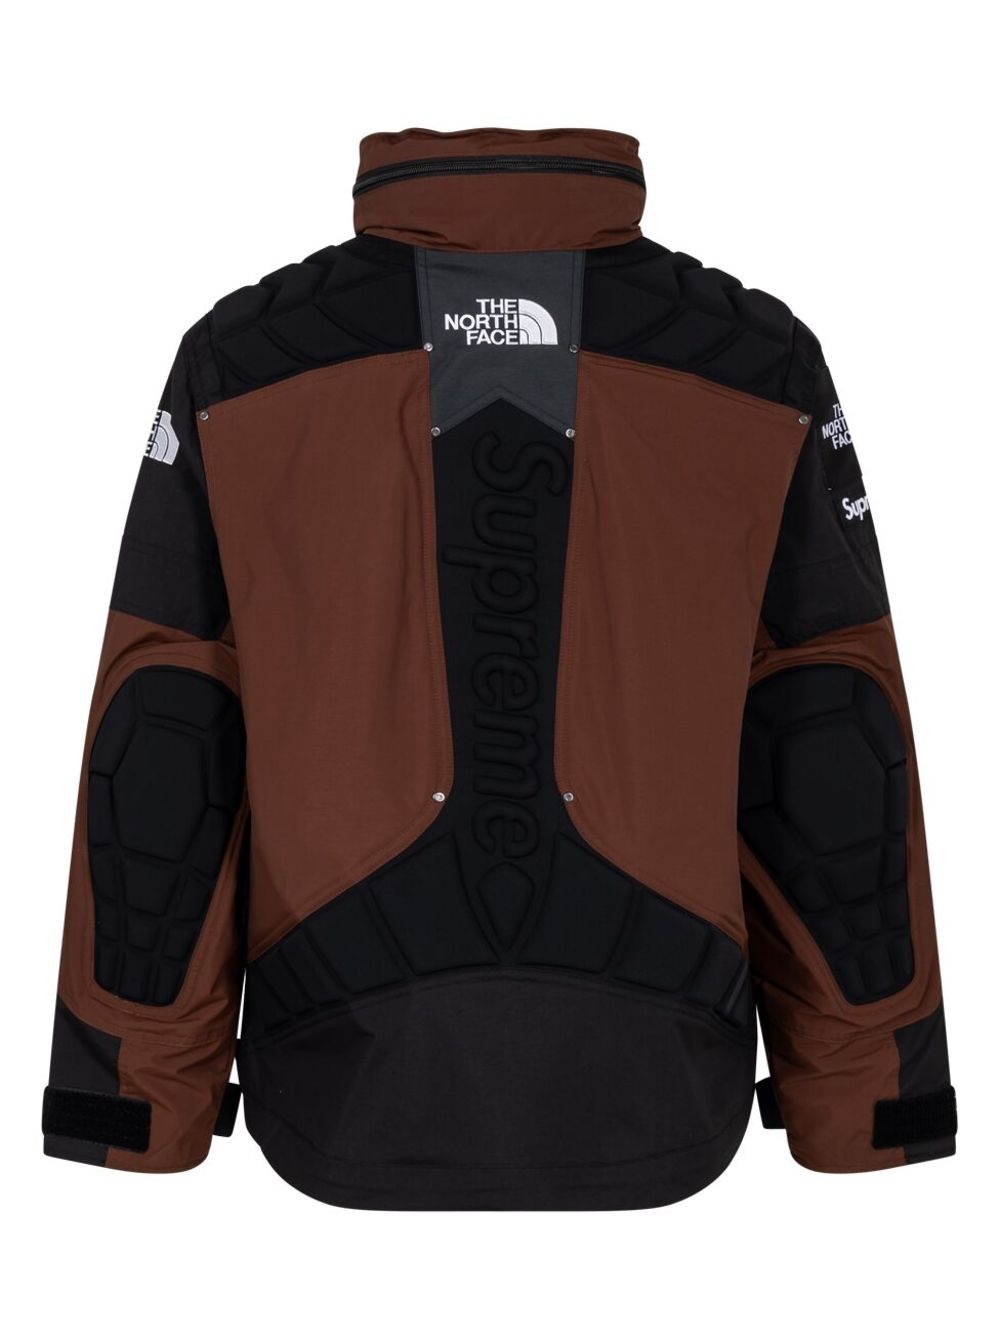 x The North Face Steep Tech Apogee "Brown" jacket - 3